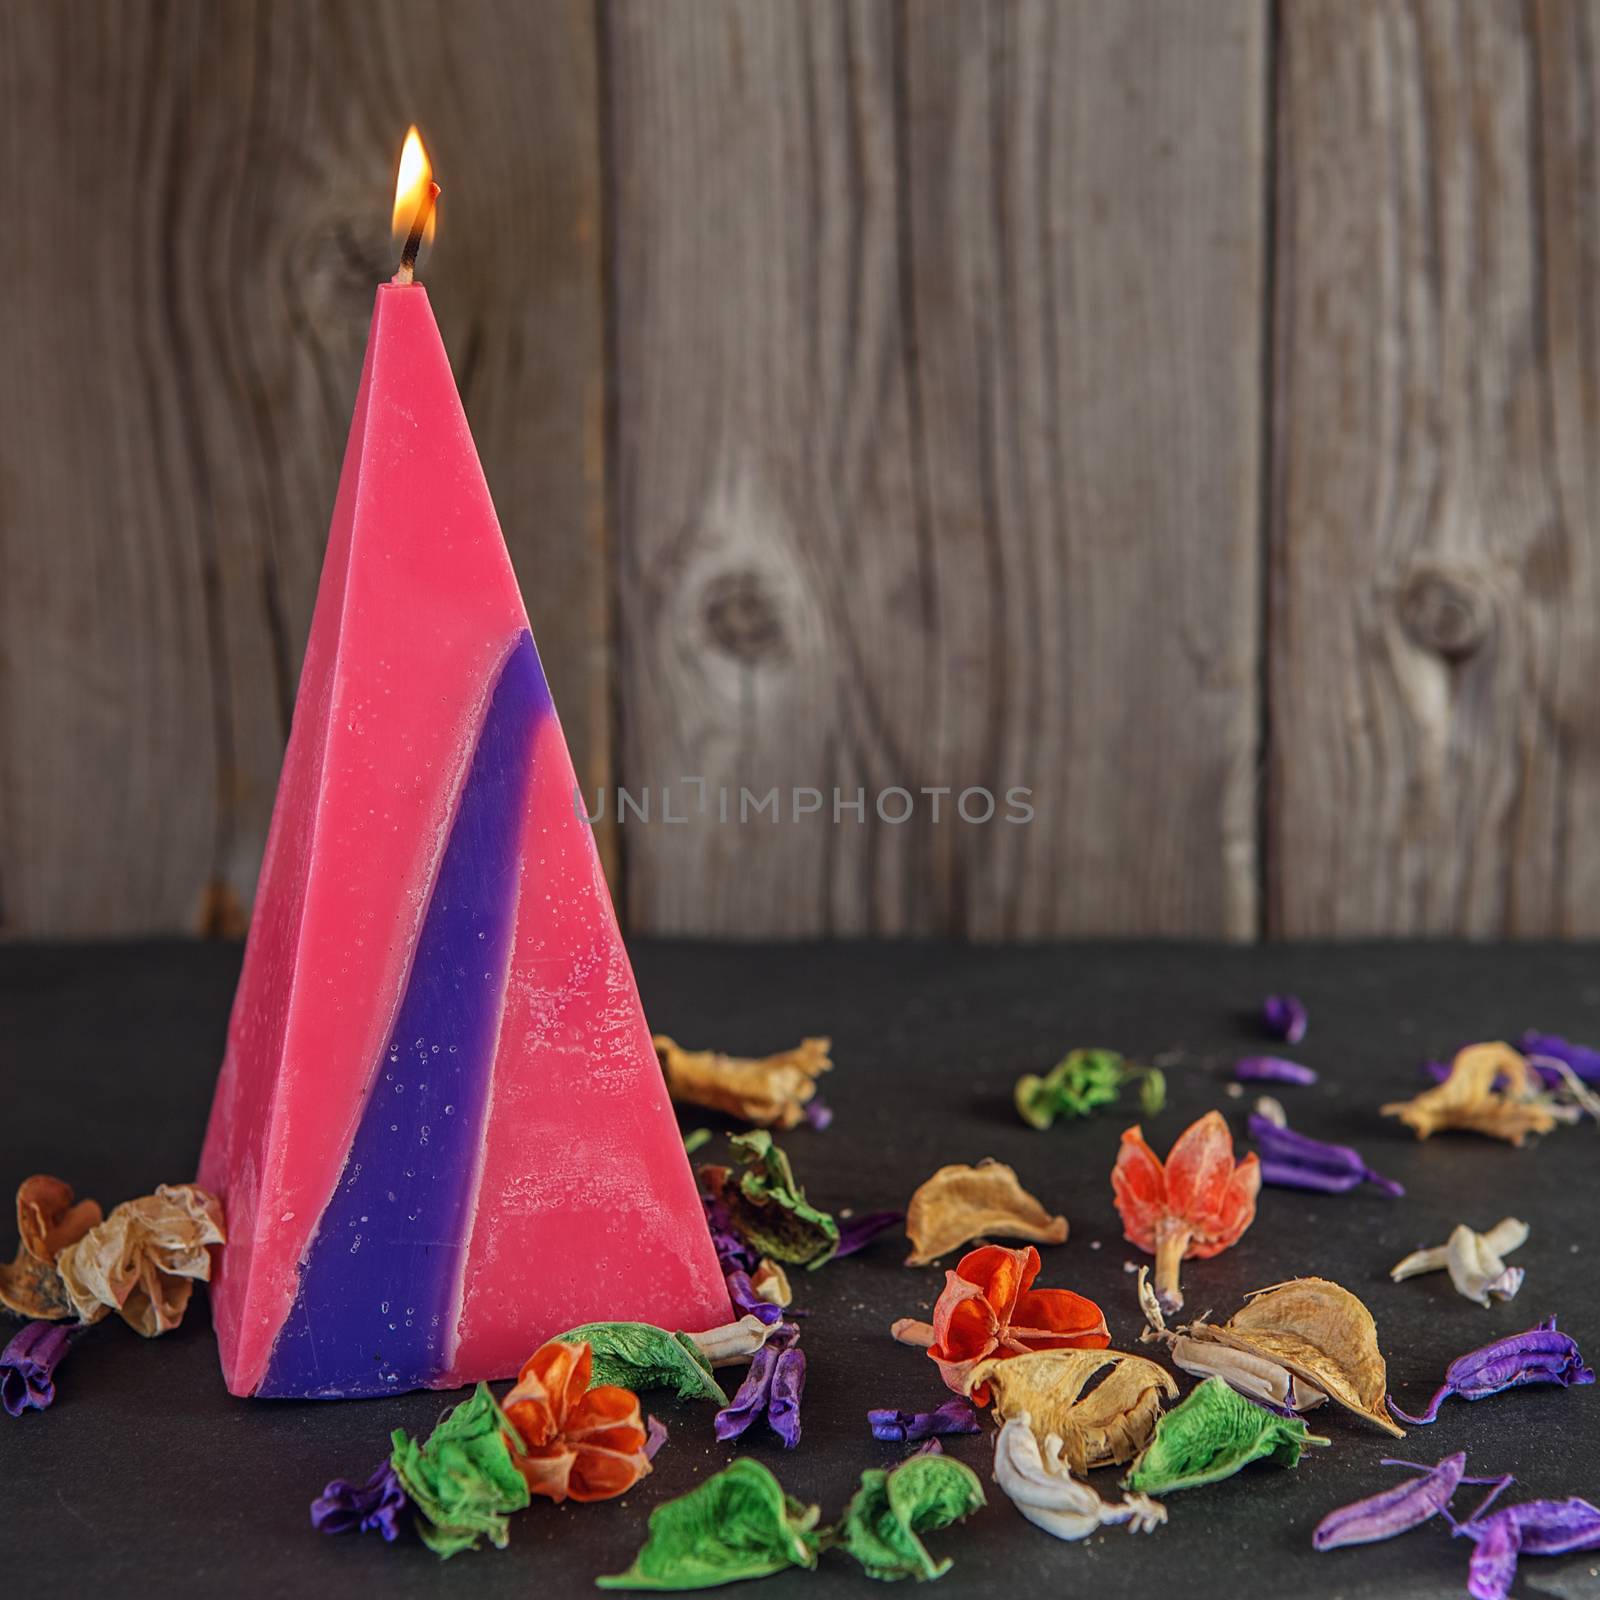 Decorative Handmade candle in the shape of a pyramid among dry flowers on black surface